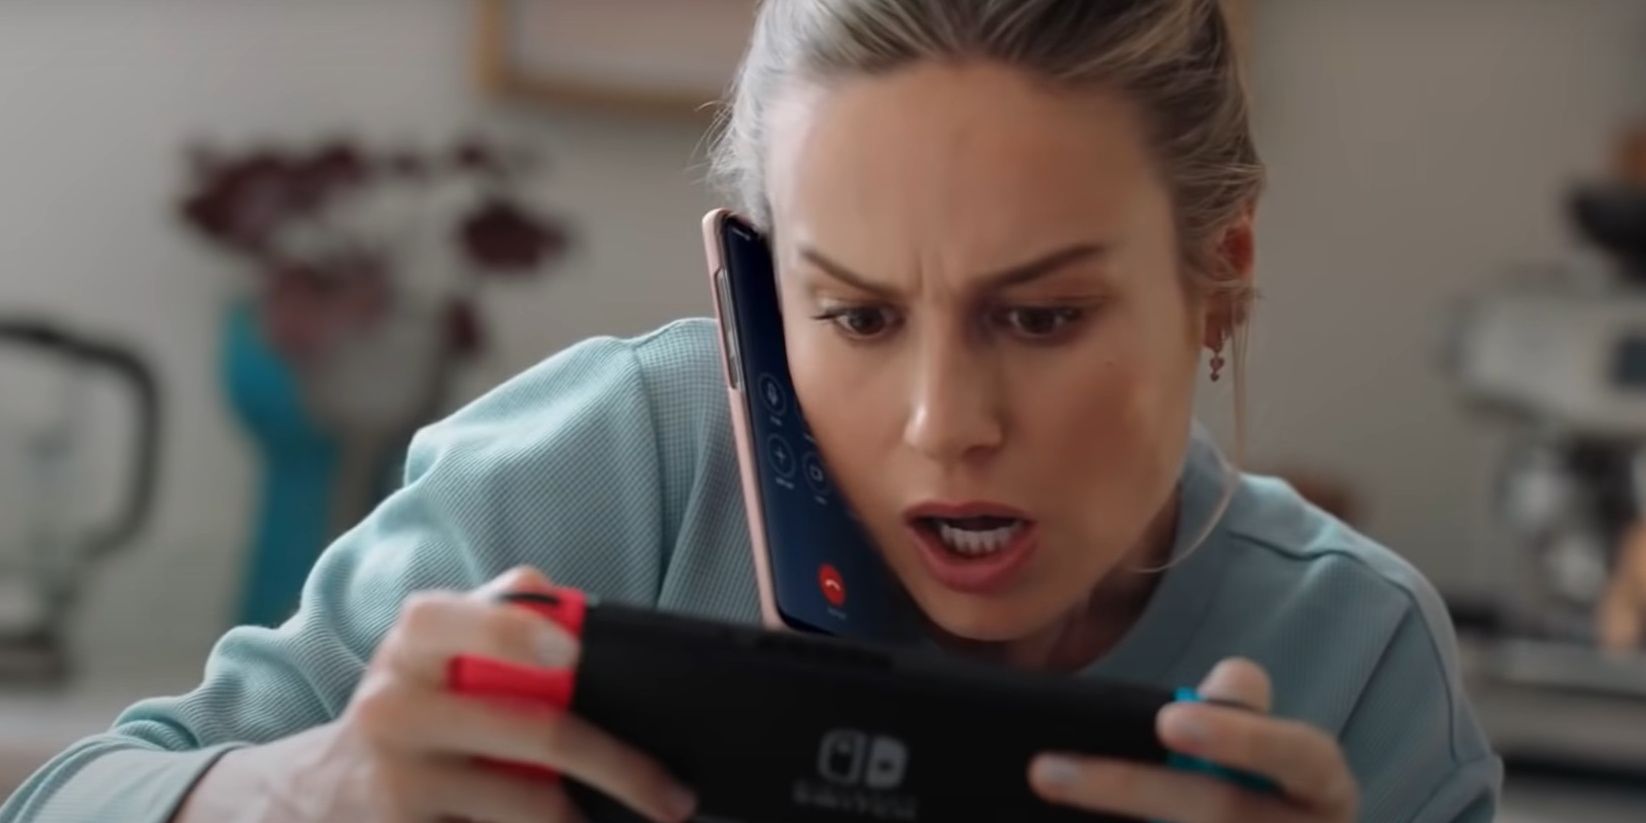 Brie Larson playing with her Nintendo Switch while on the phone during a Nintendo Switch commercial